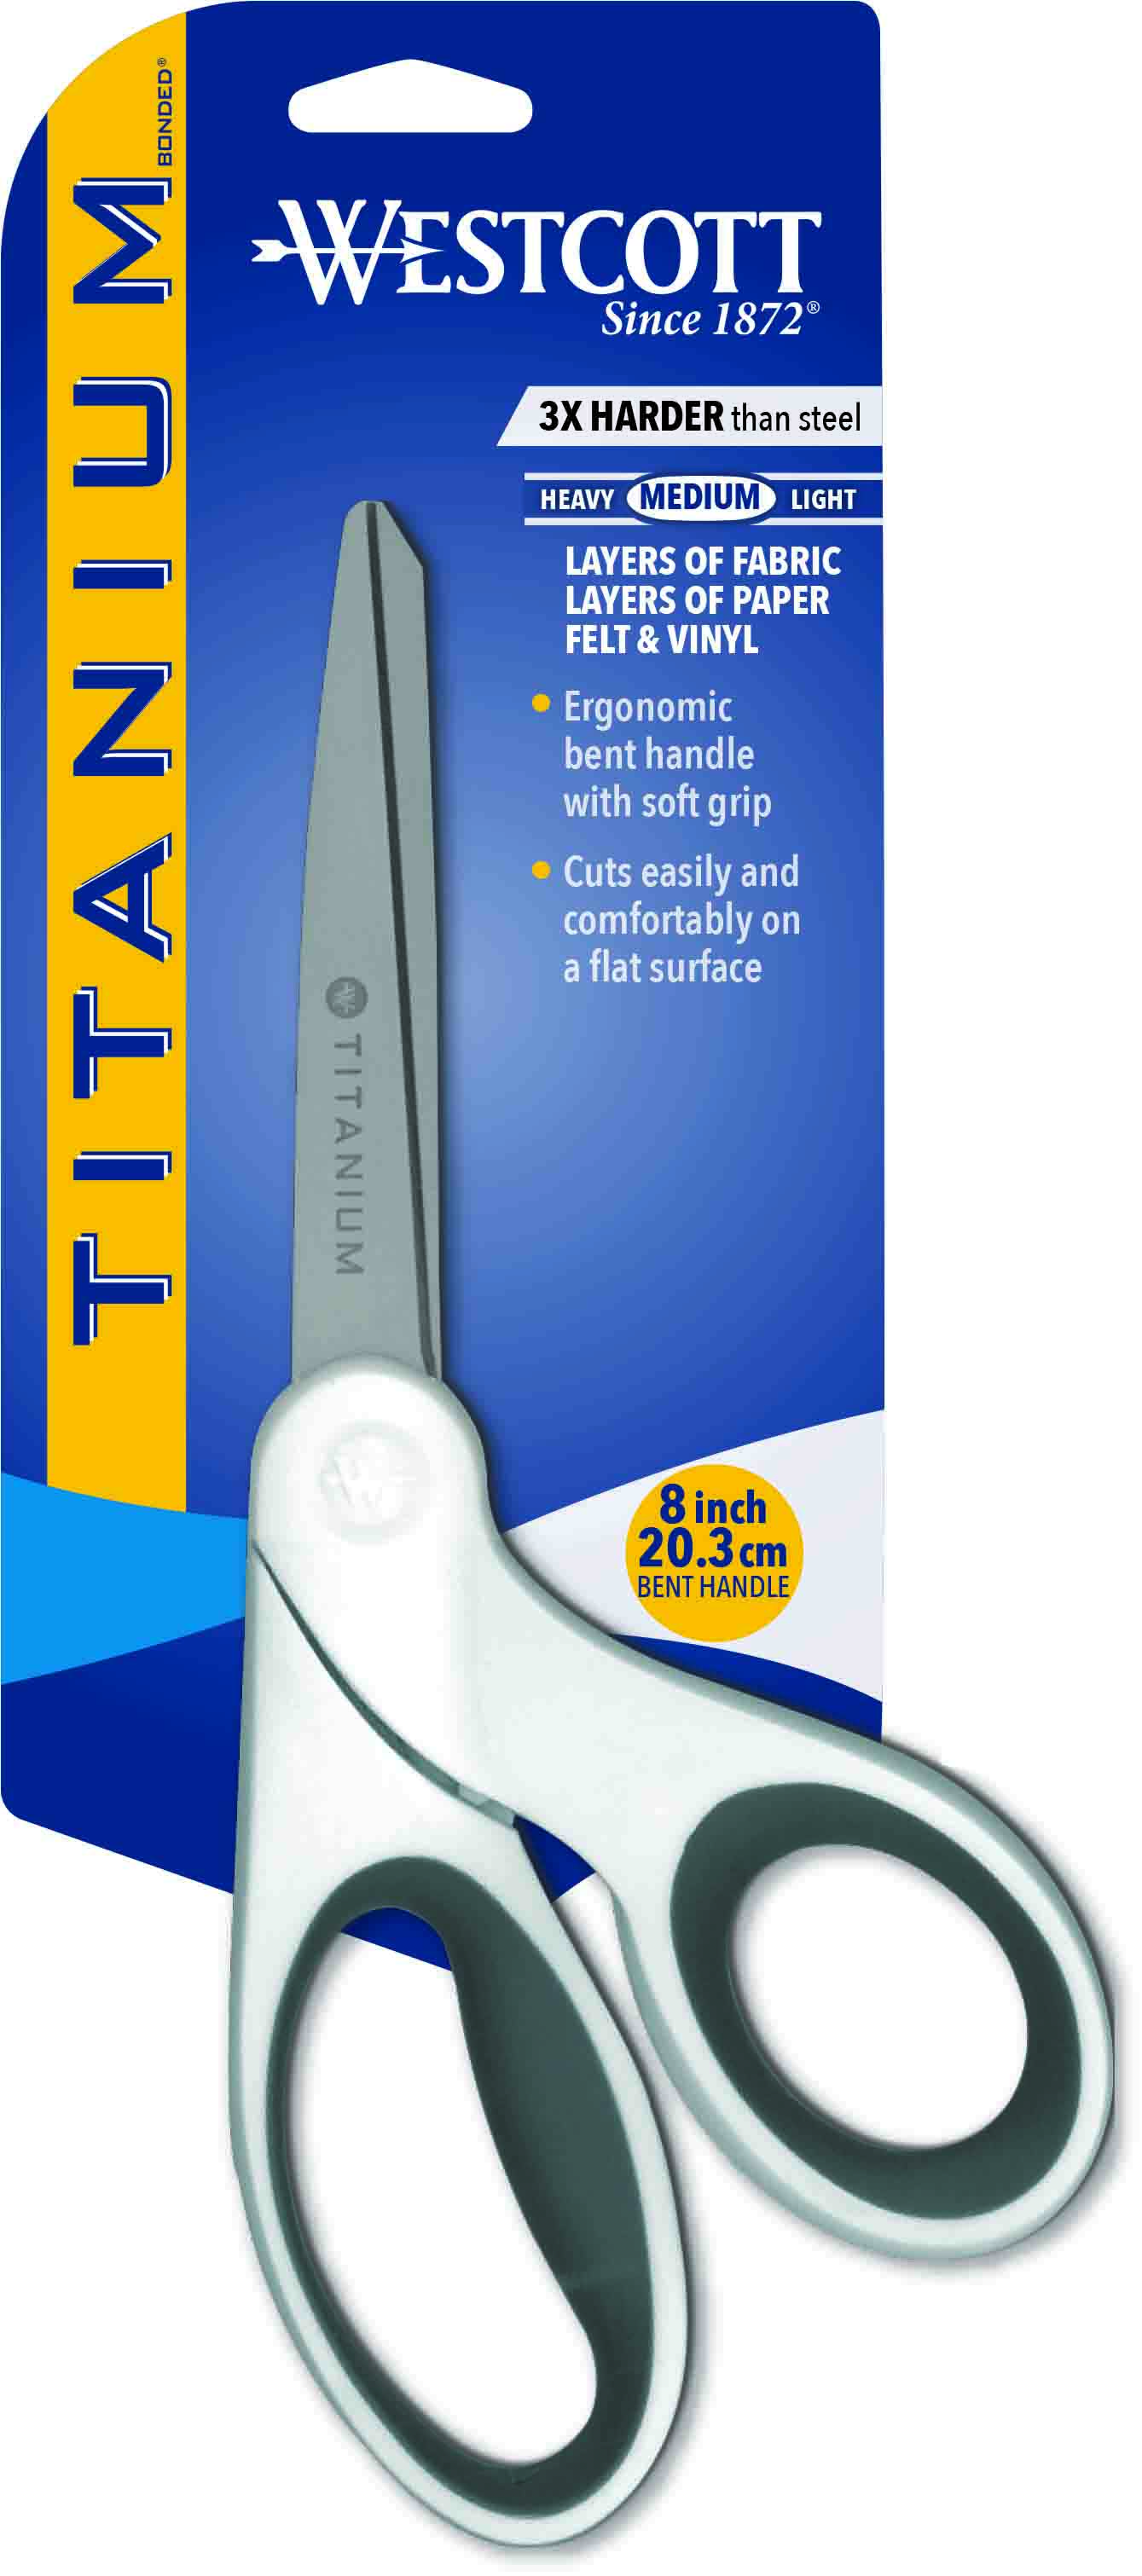 Westcott Titanium Scissors 8 In. (7 in.?) lasted about 8-10 years until  handle gave out : r/productfails